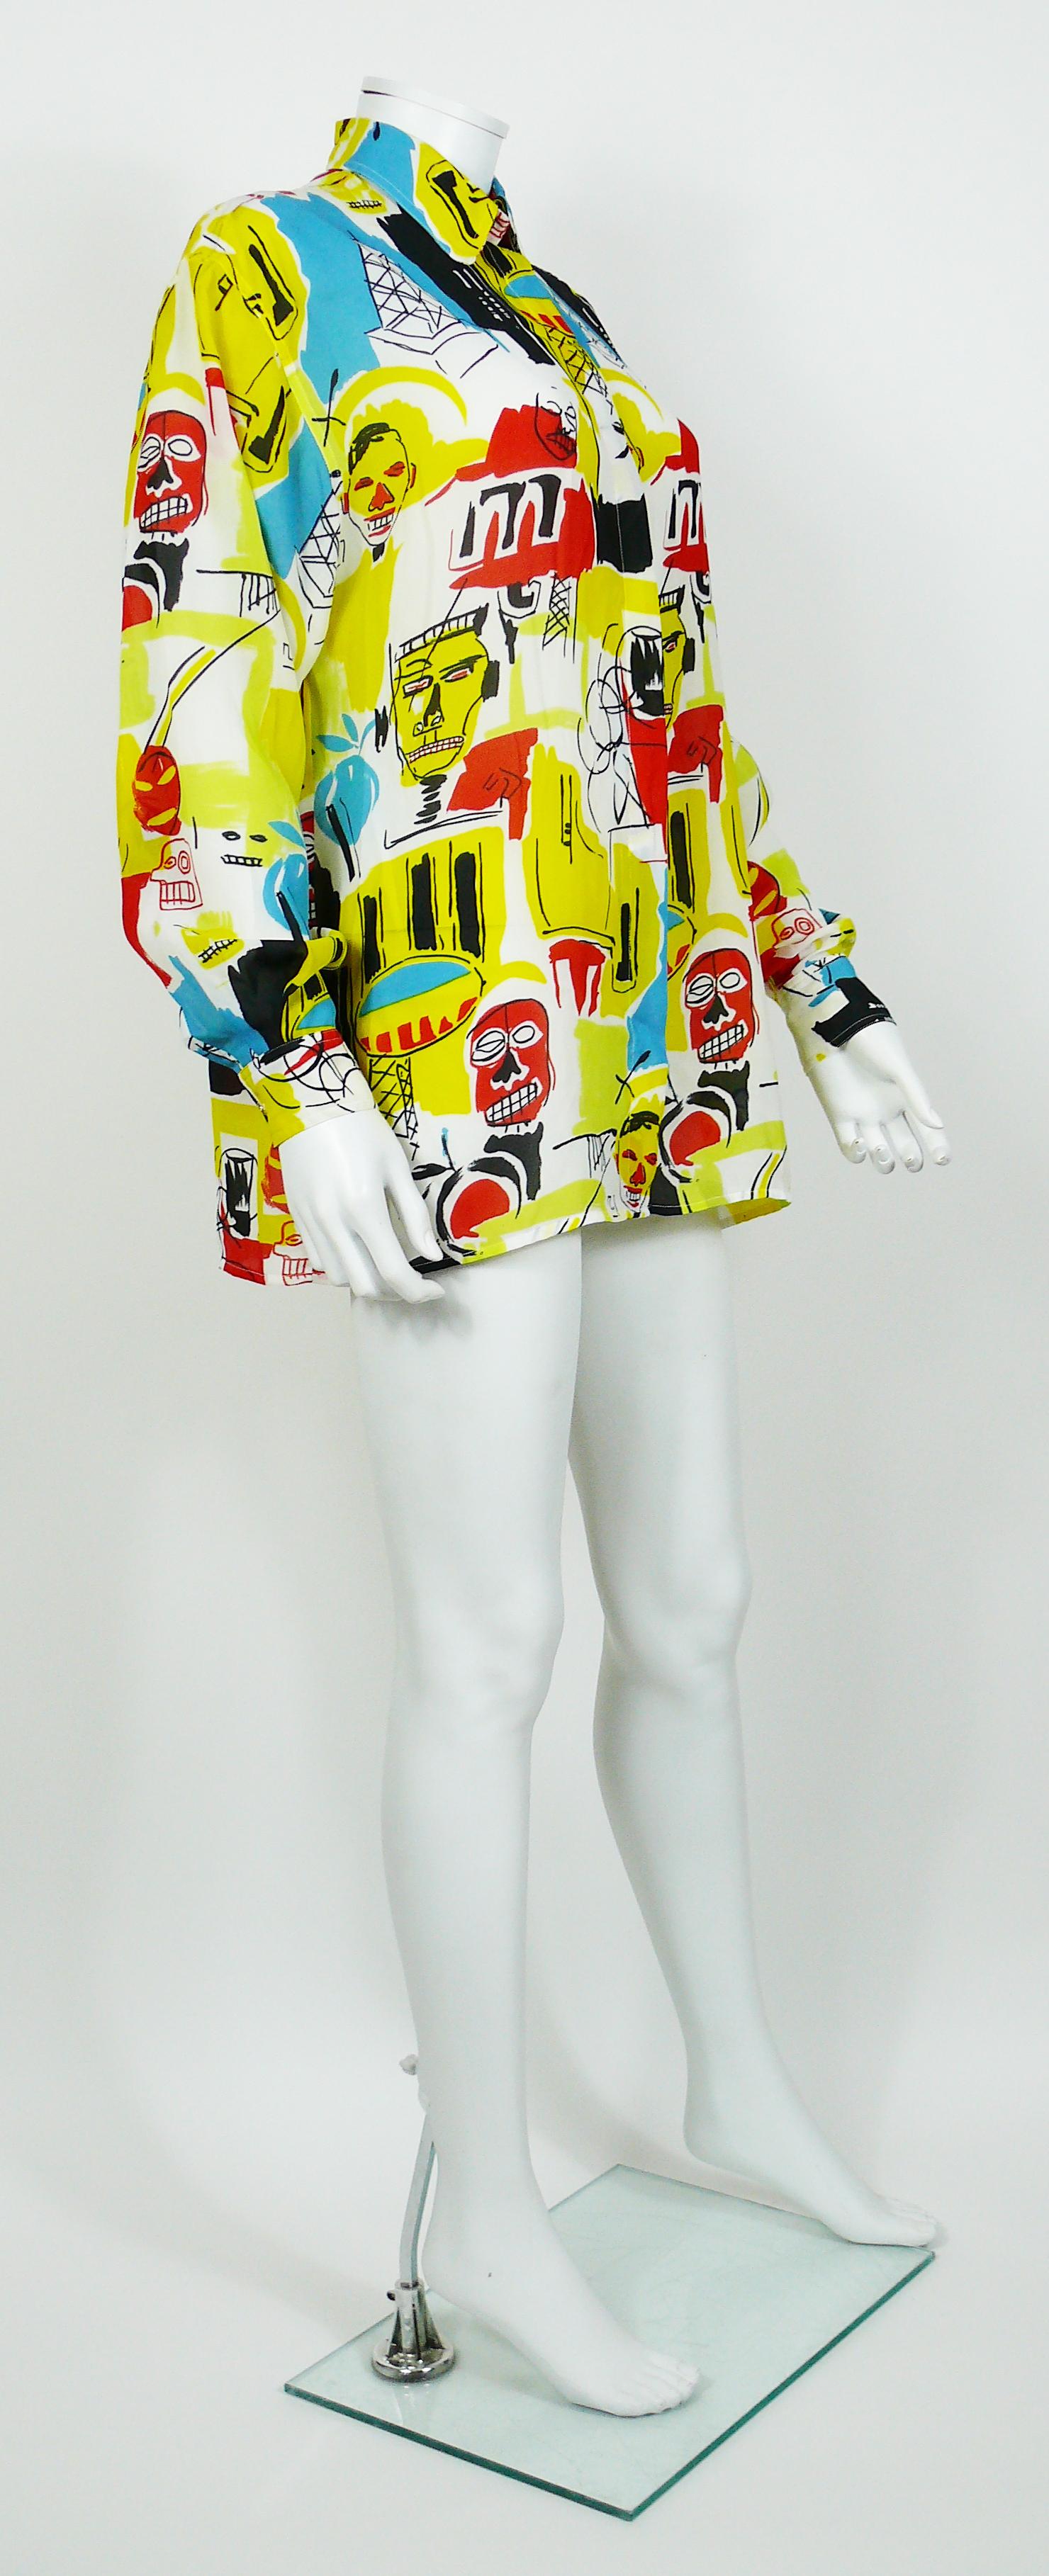 VERSACE JEANS COUTURE vintage multicoloured basquiat inspired print shirt.

This shirt features :
- Opulent multicolored design on a white background
- Long sleeves
- Classic collar
- Front buttoning
- Button cuffs
- Medusa silver toned